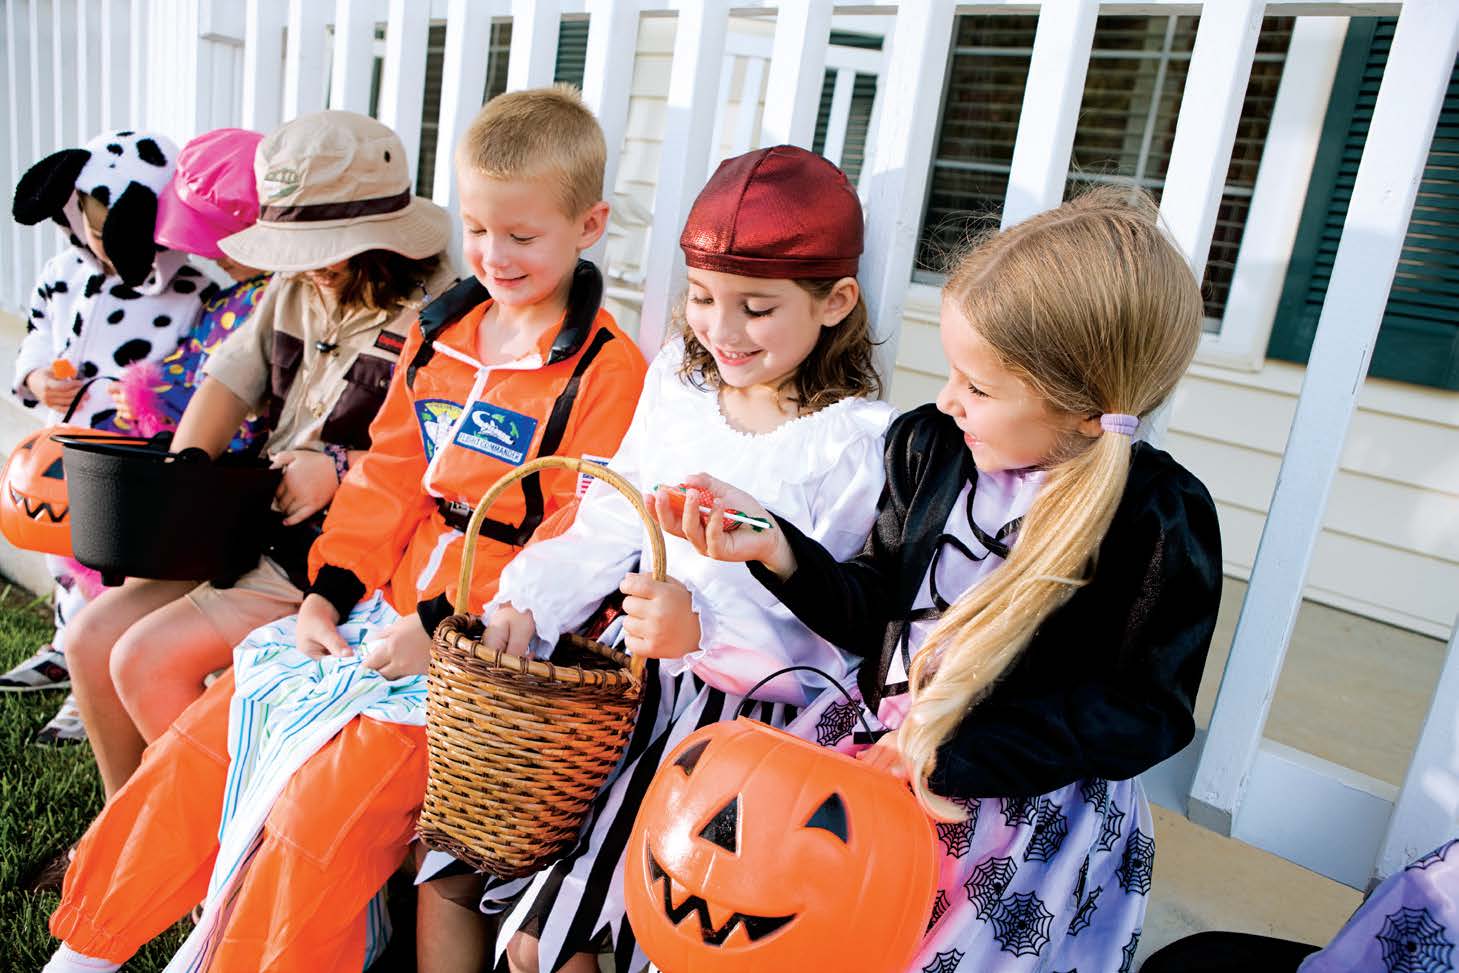 official rules regarding trick-or-treating.